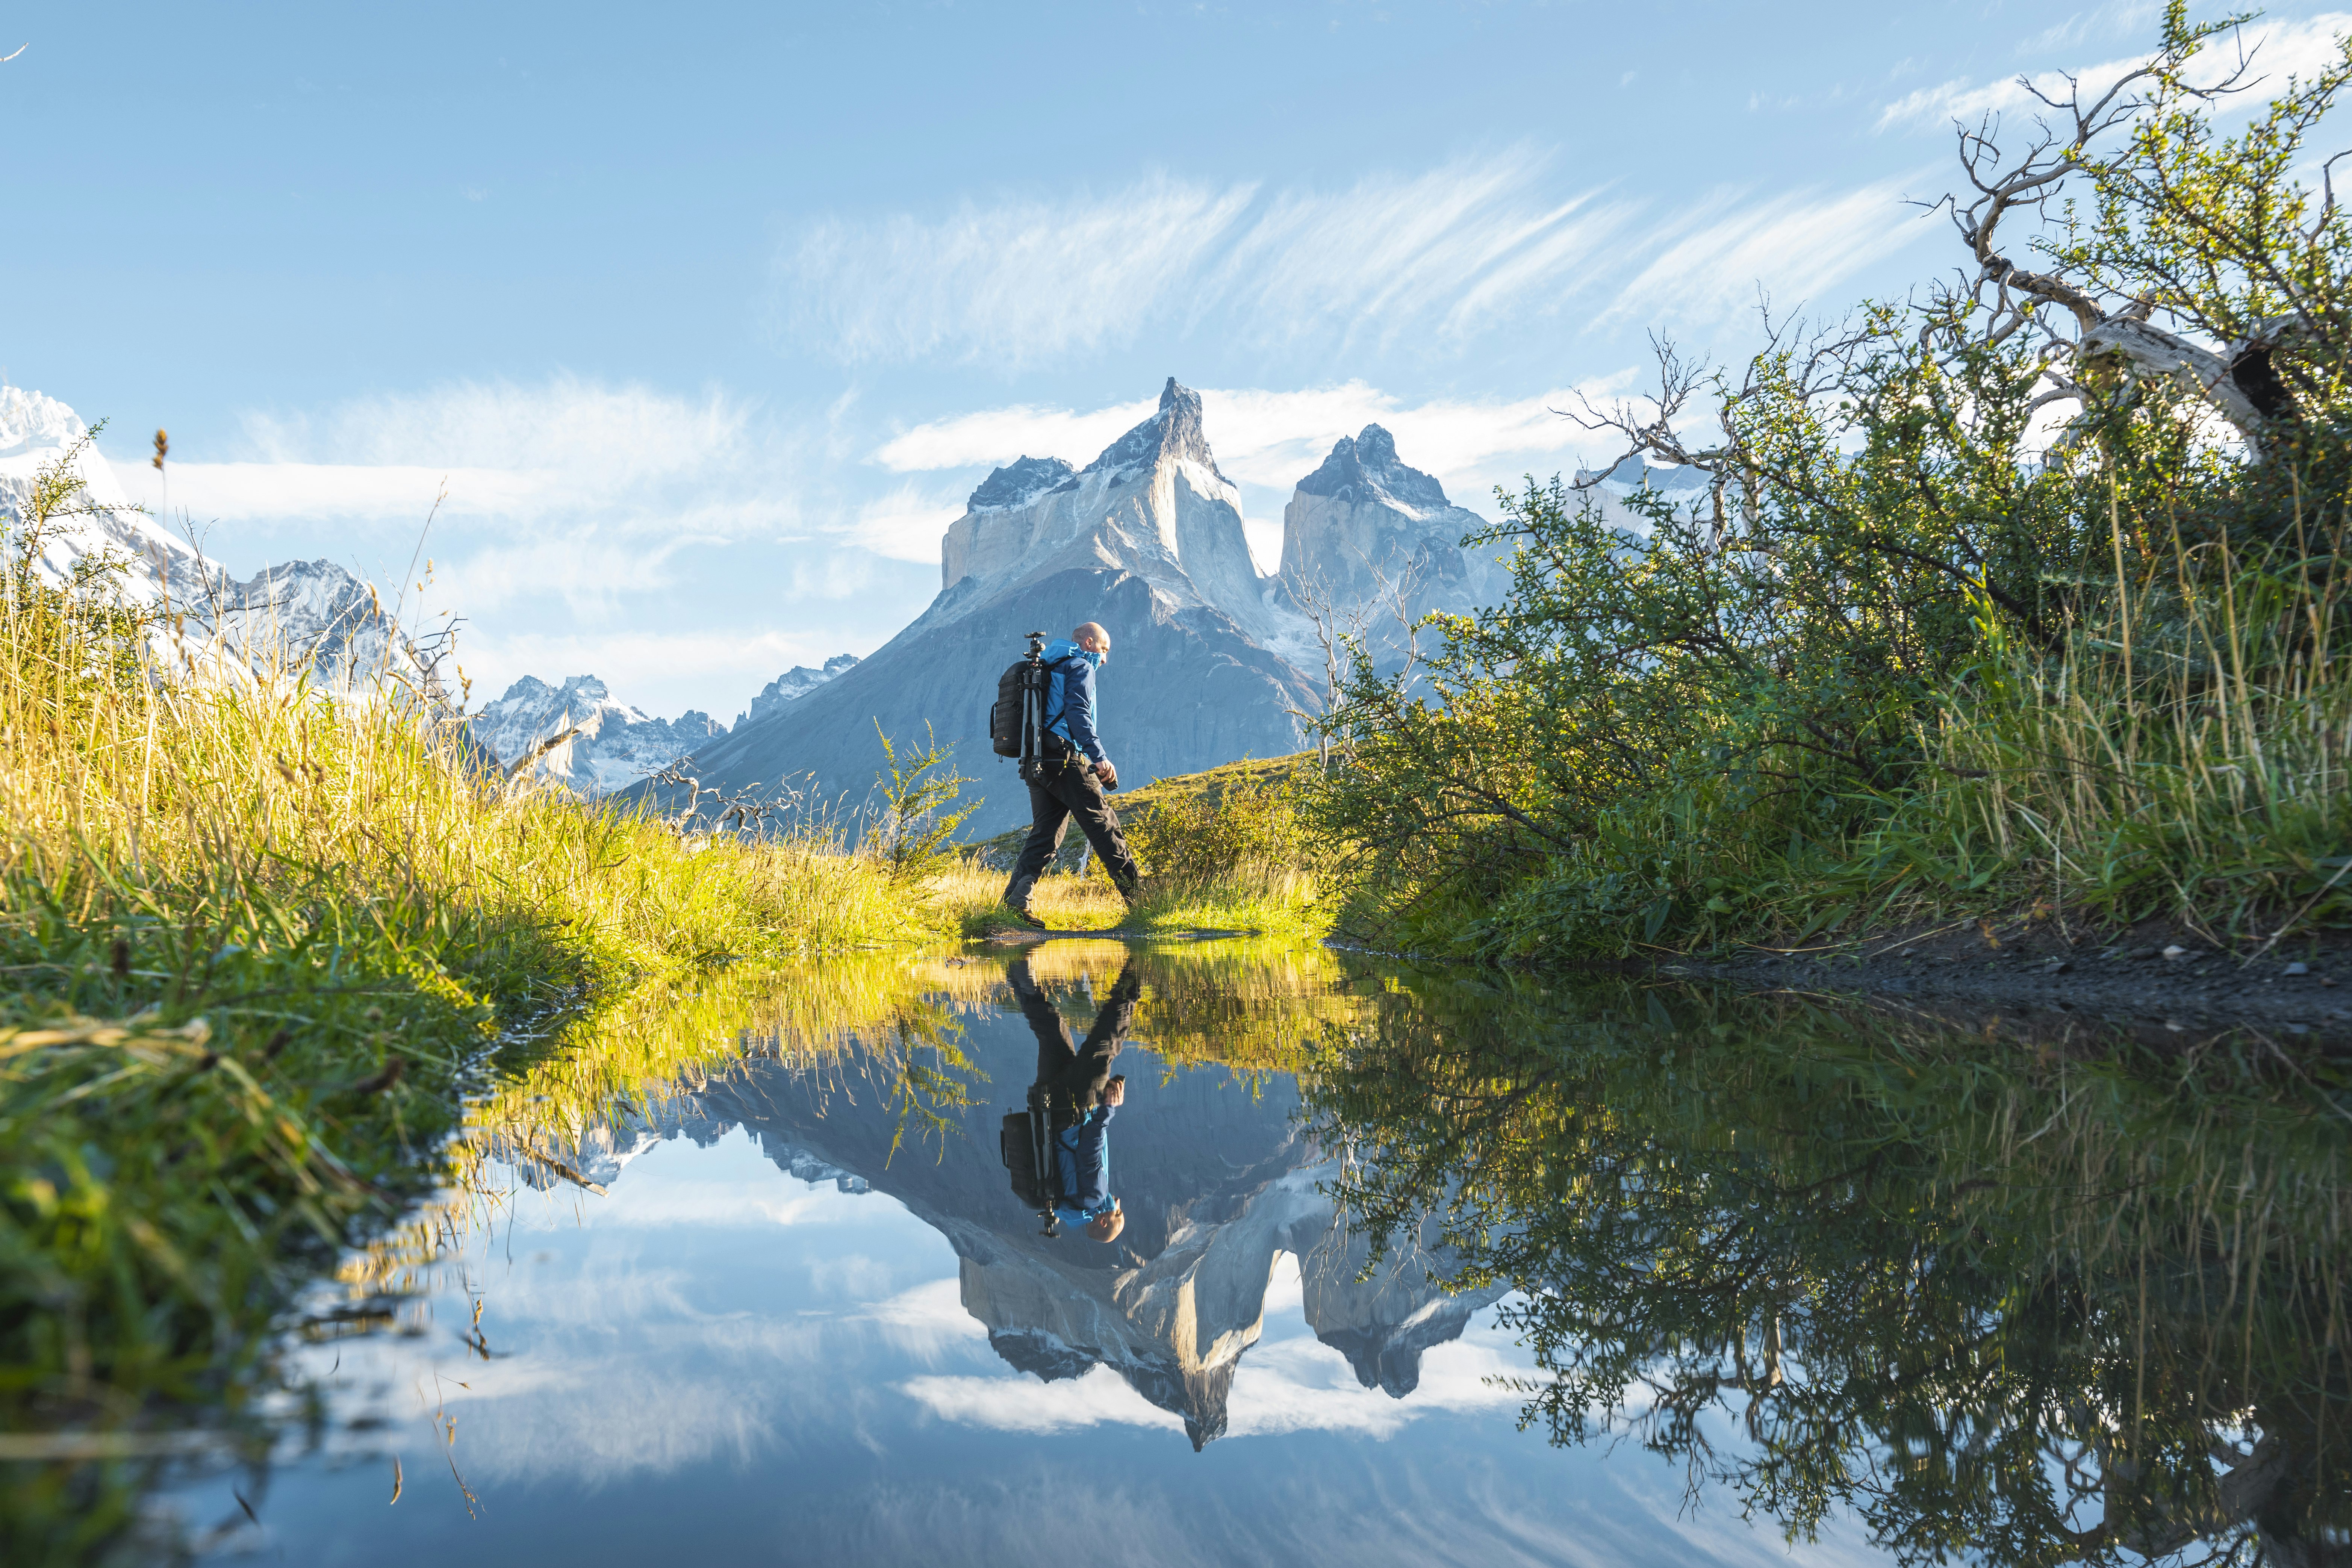 One man crossing a pond in Torres del Paine National Park, Chile